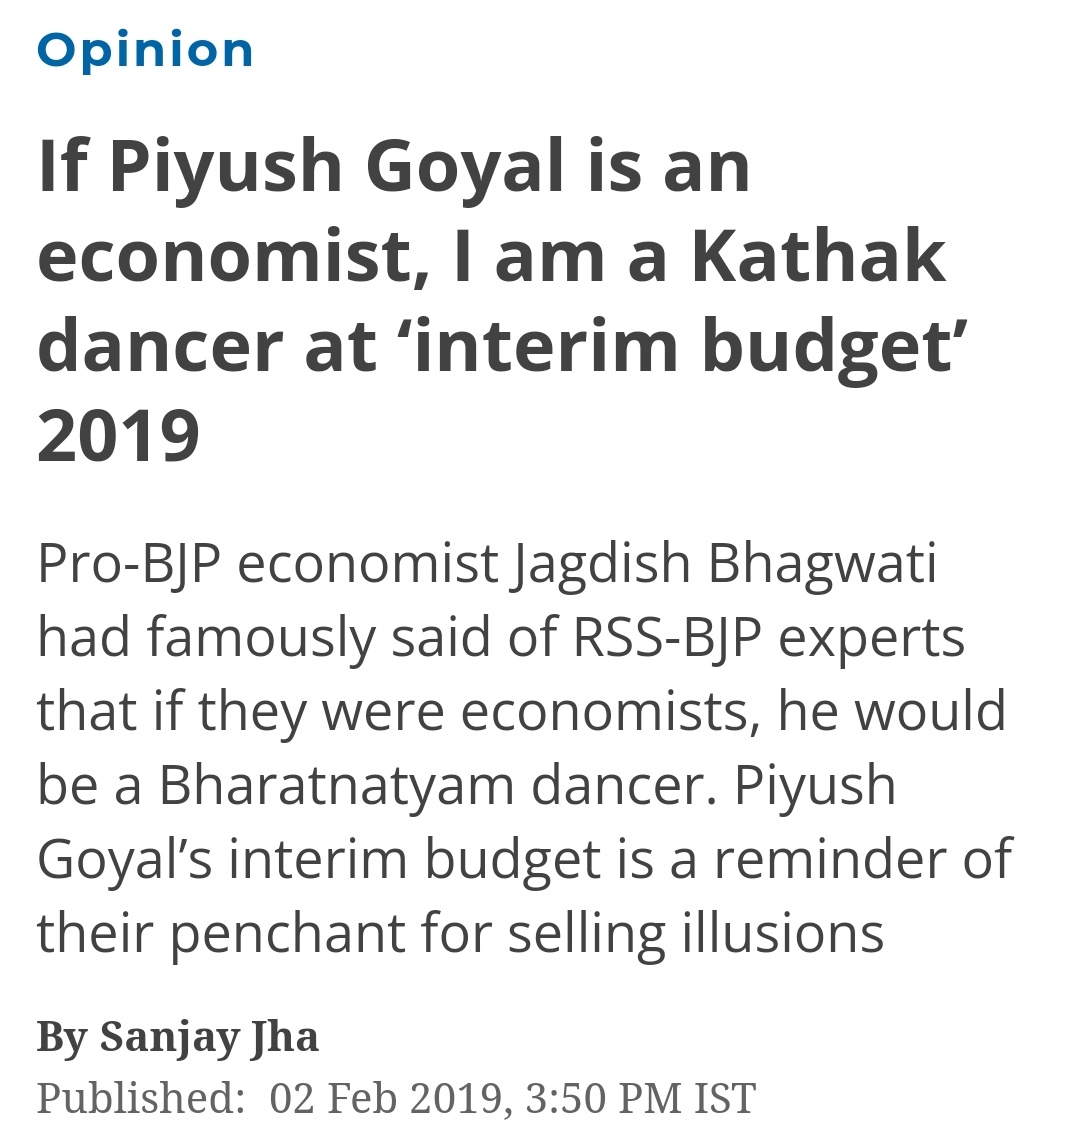 @JhaSanjay Can you make it clear from your own article? 
Kathak or Bharatnatyam?